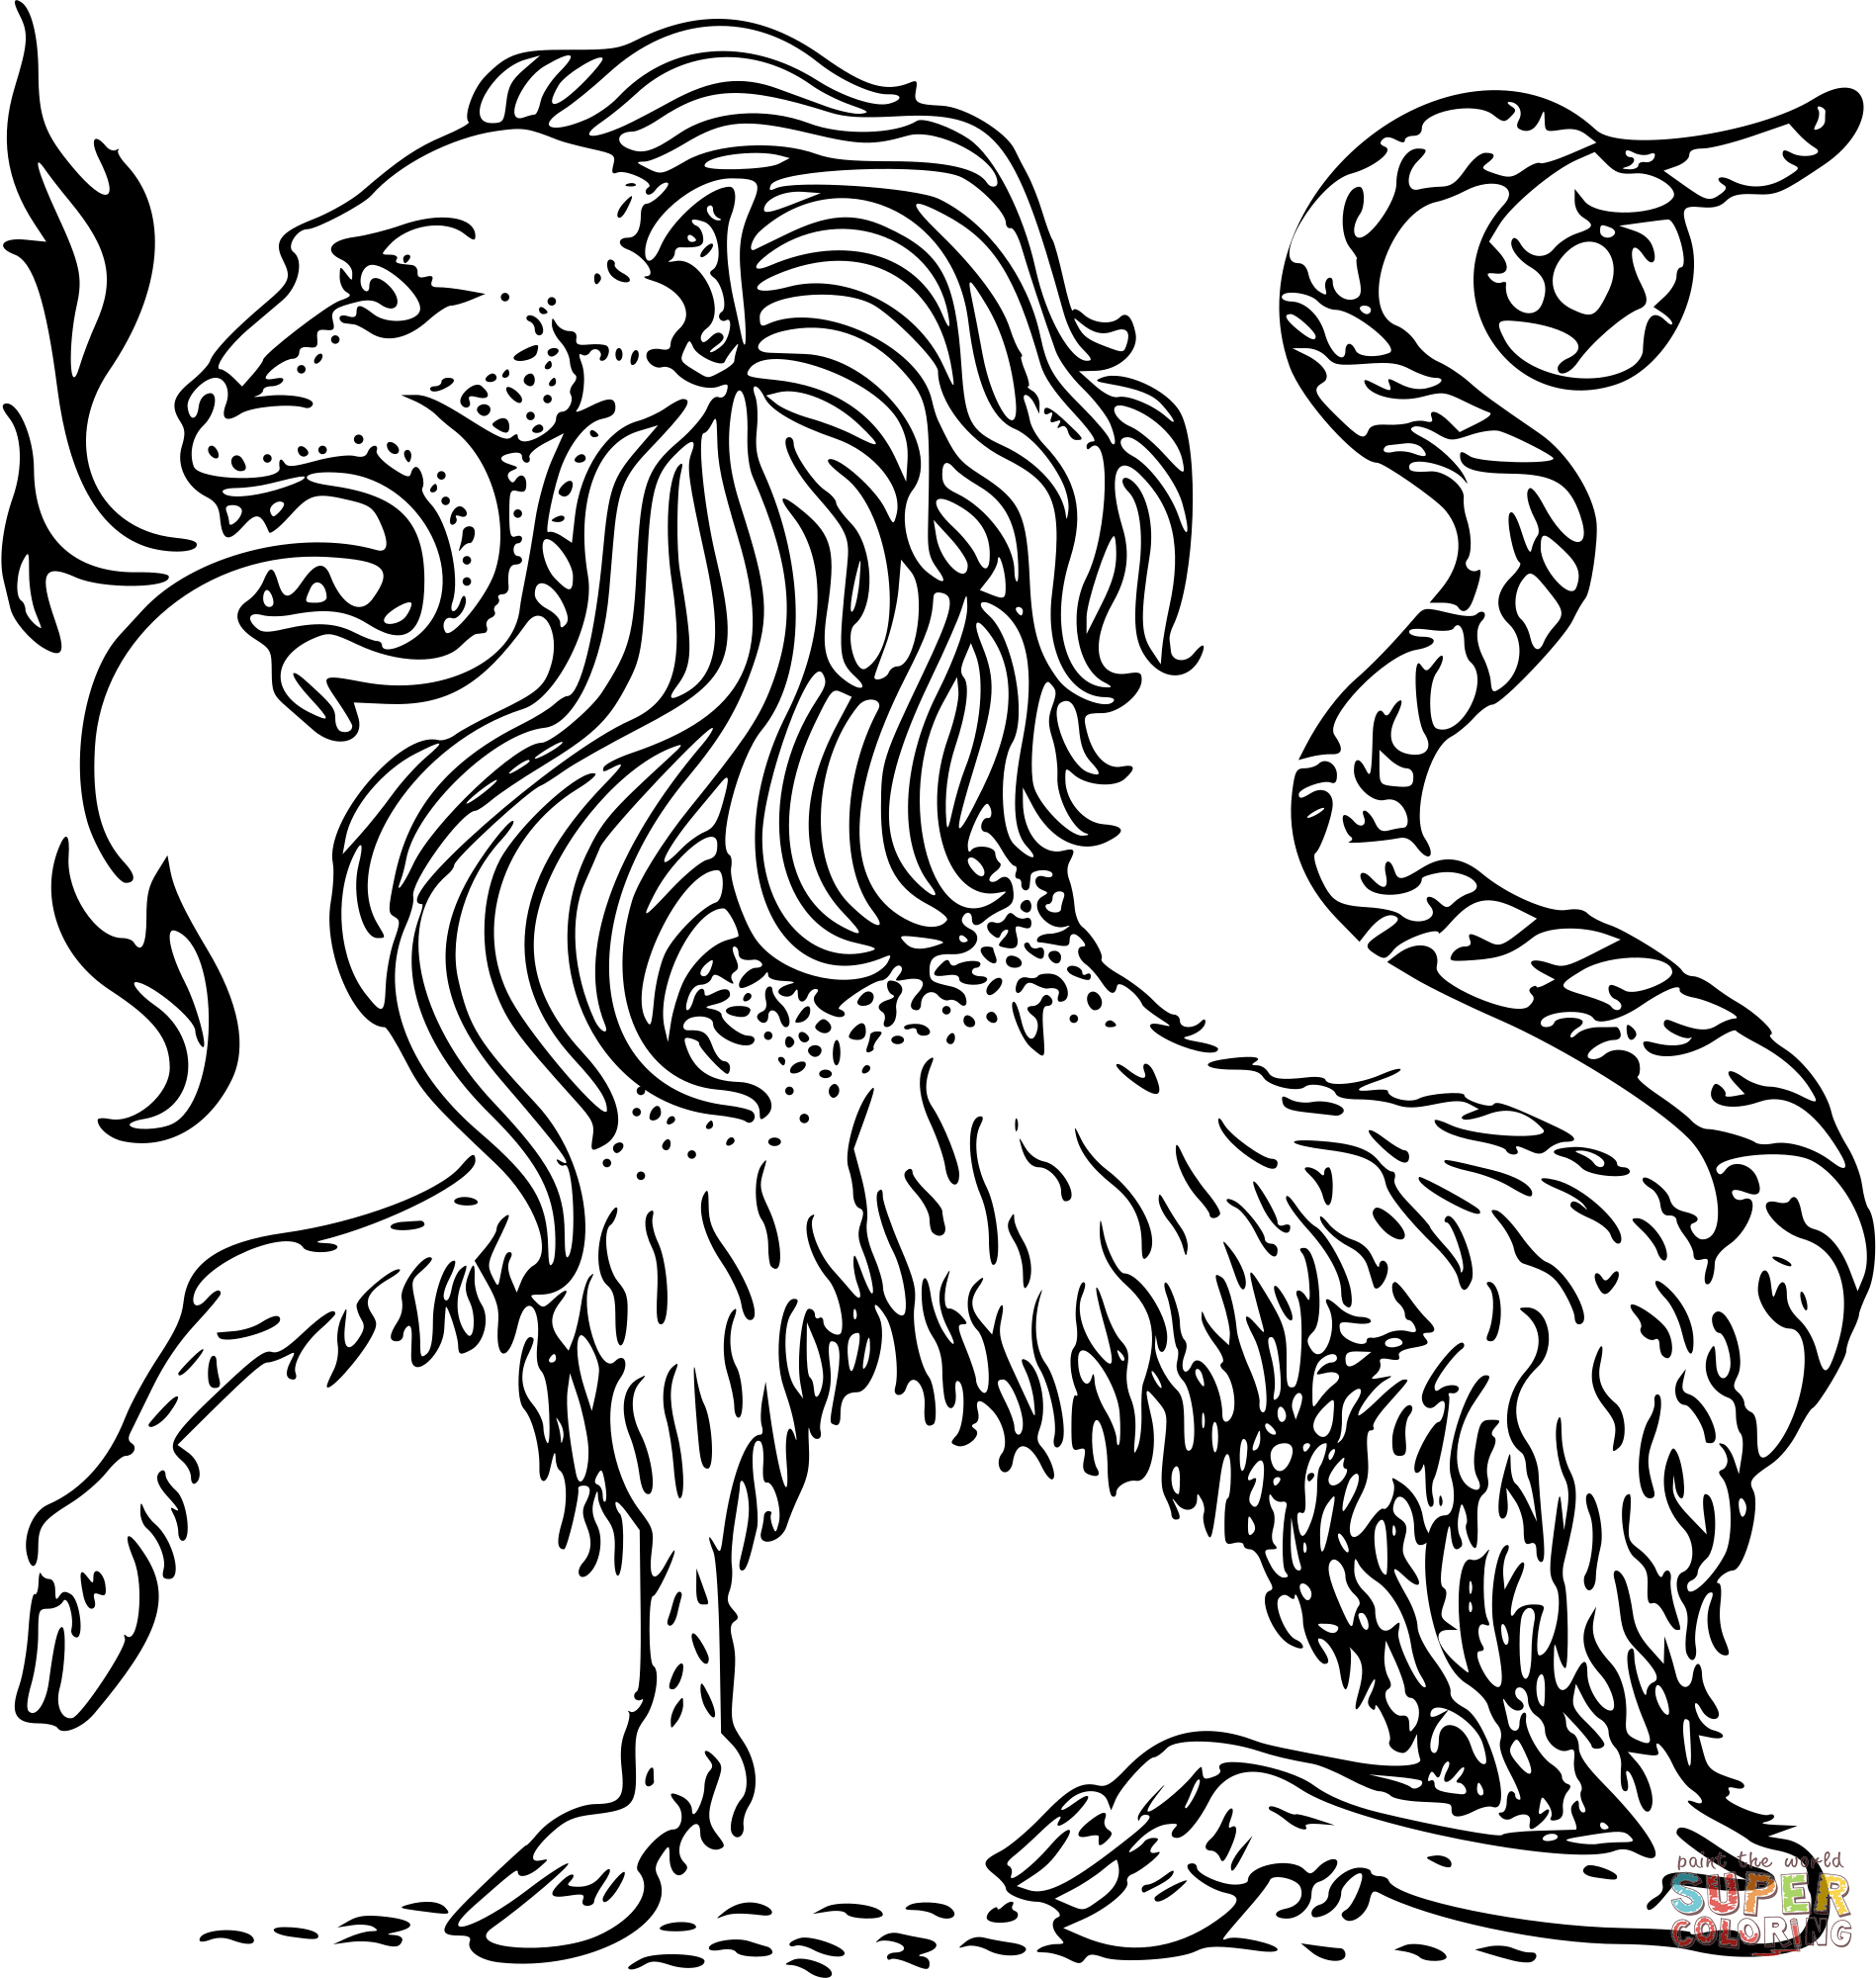 Chimera coloring page | Free Printable Coloring Pages